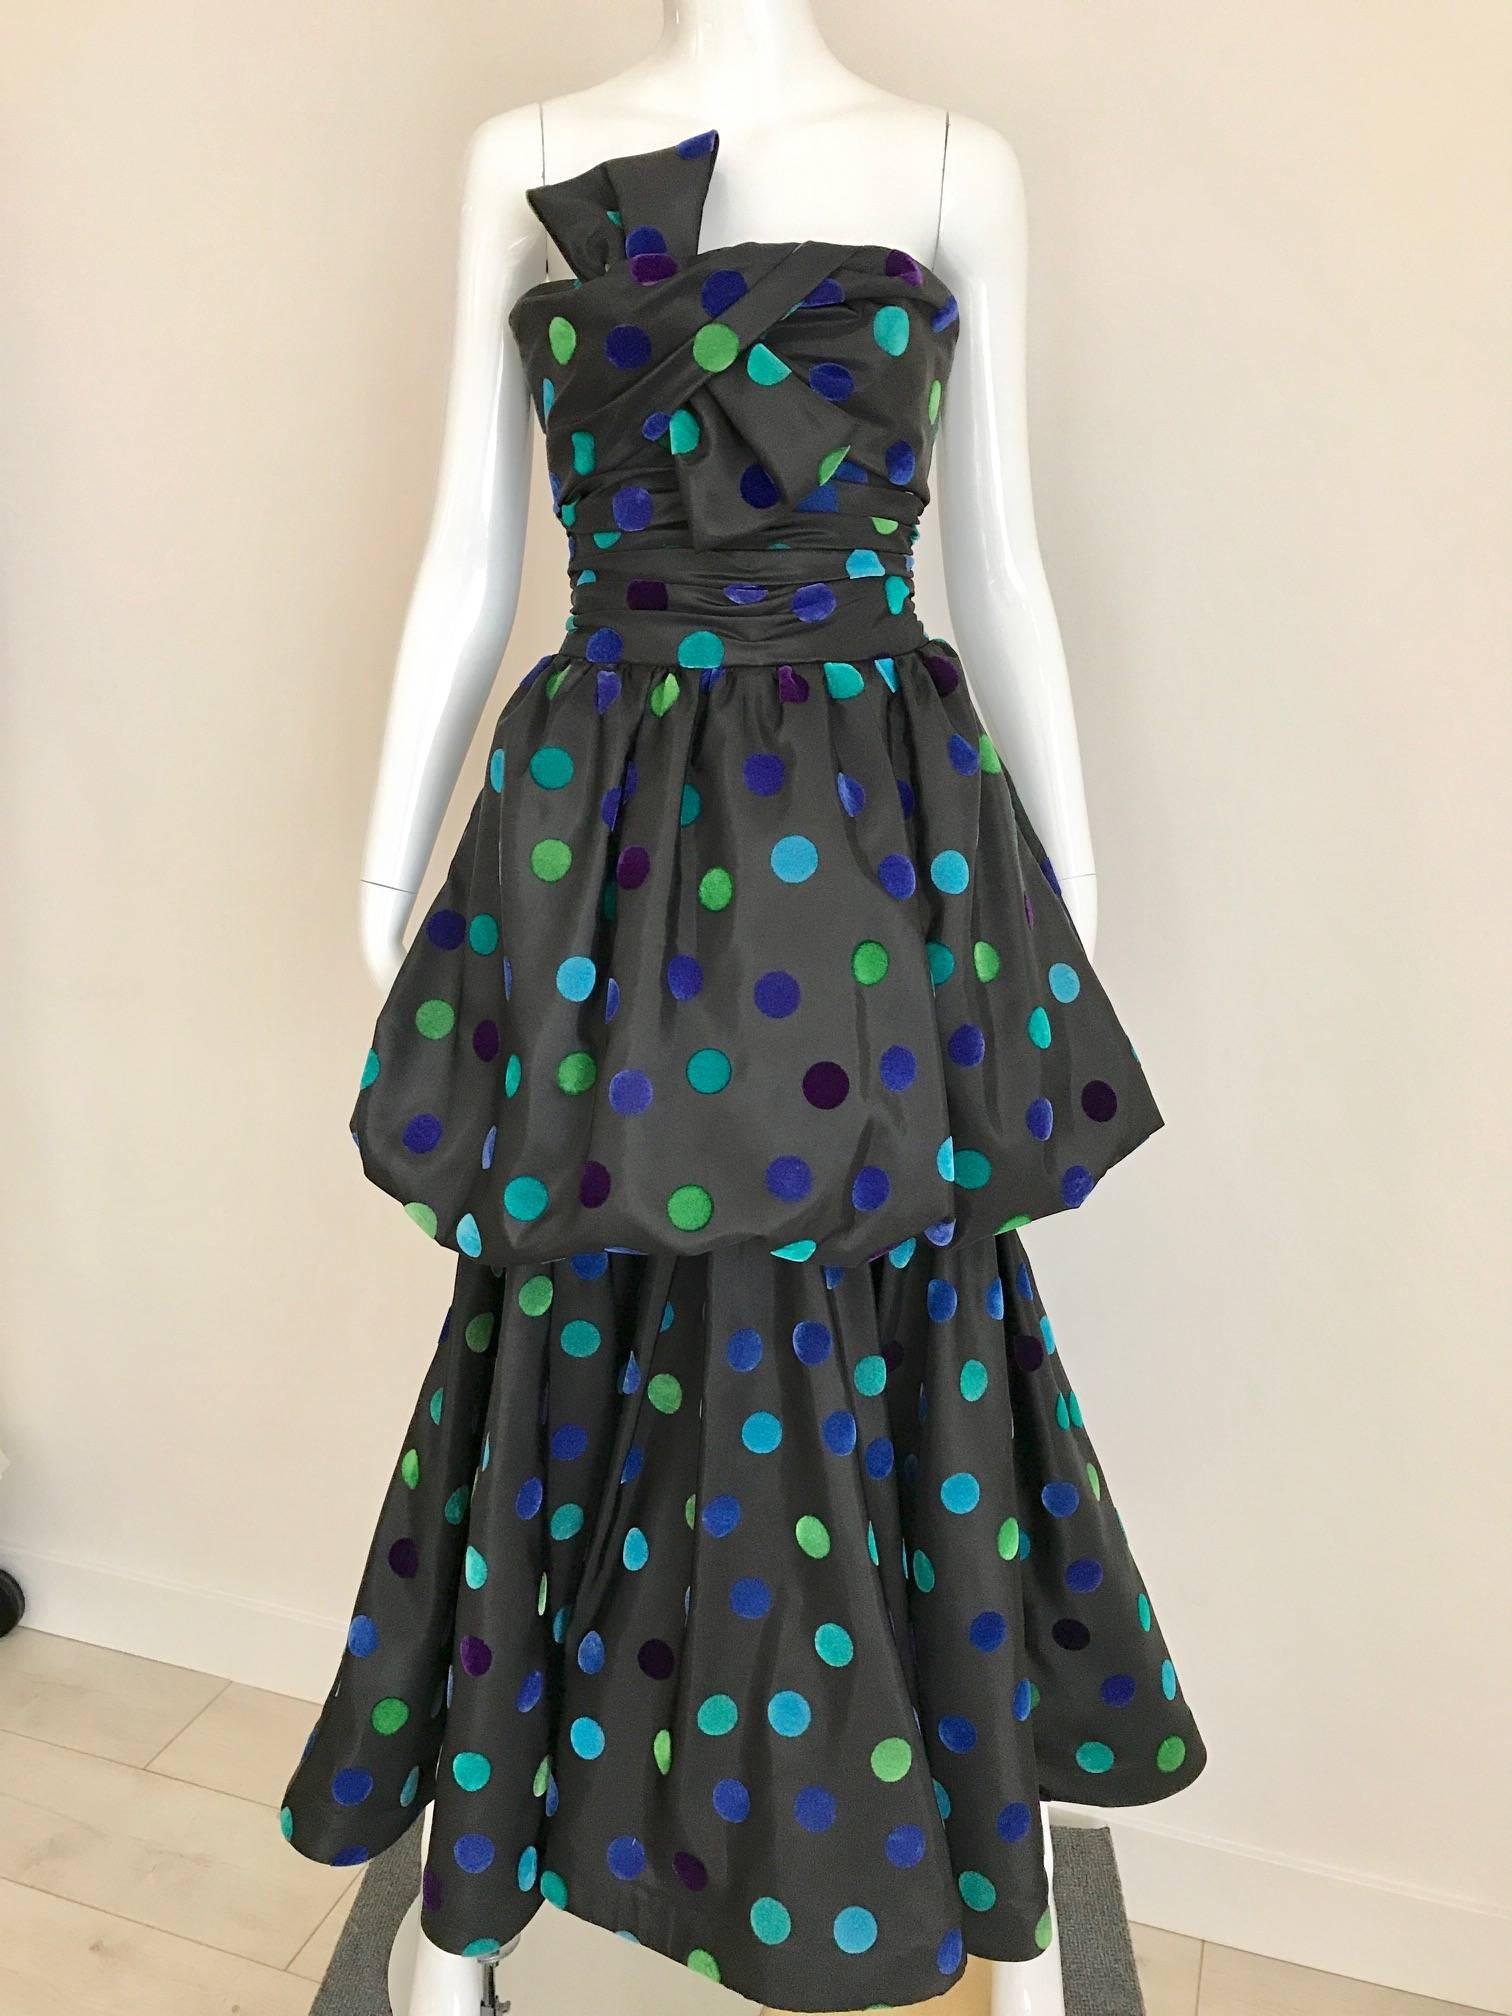 1980s Vintage Nina Ricci Strapless Silk Tafetta  Multi Color Polkadot Gown  featuring Green, Teal and Blue velvet polkatdot. Trumpet Skirt style and small bow.  Perfect for Black Tie Party.
Bust: 34 inch / Waist: 26 inch  / Dress Length: 54.5